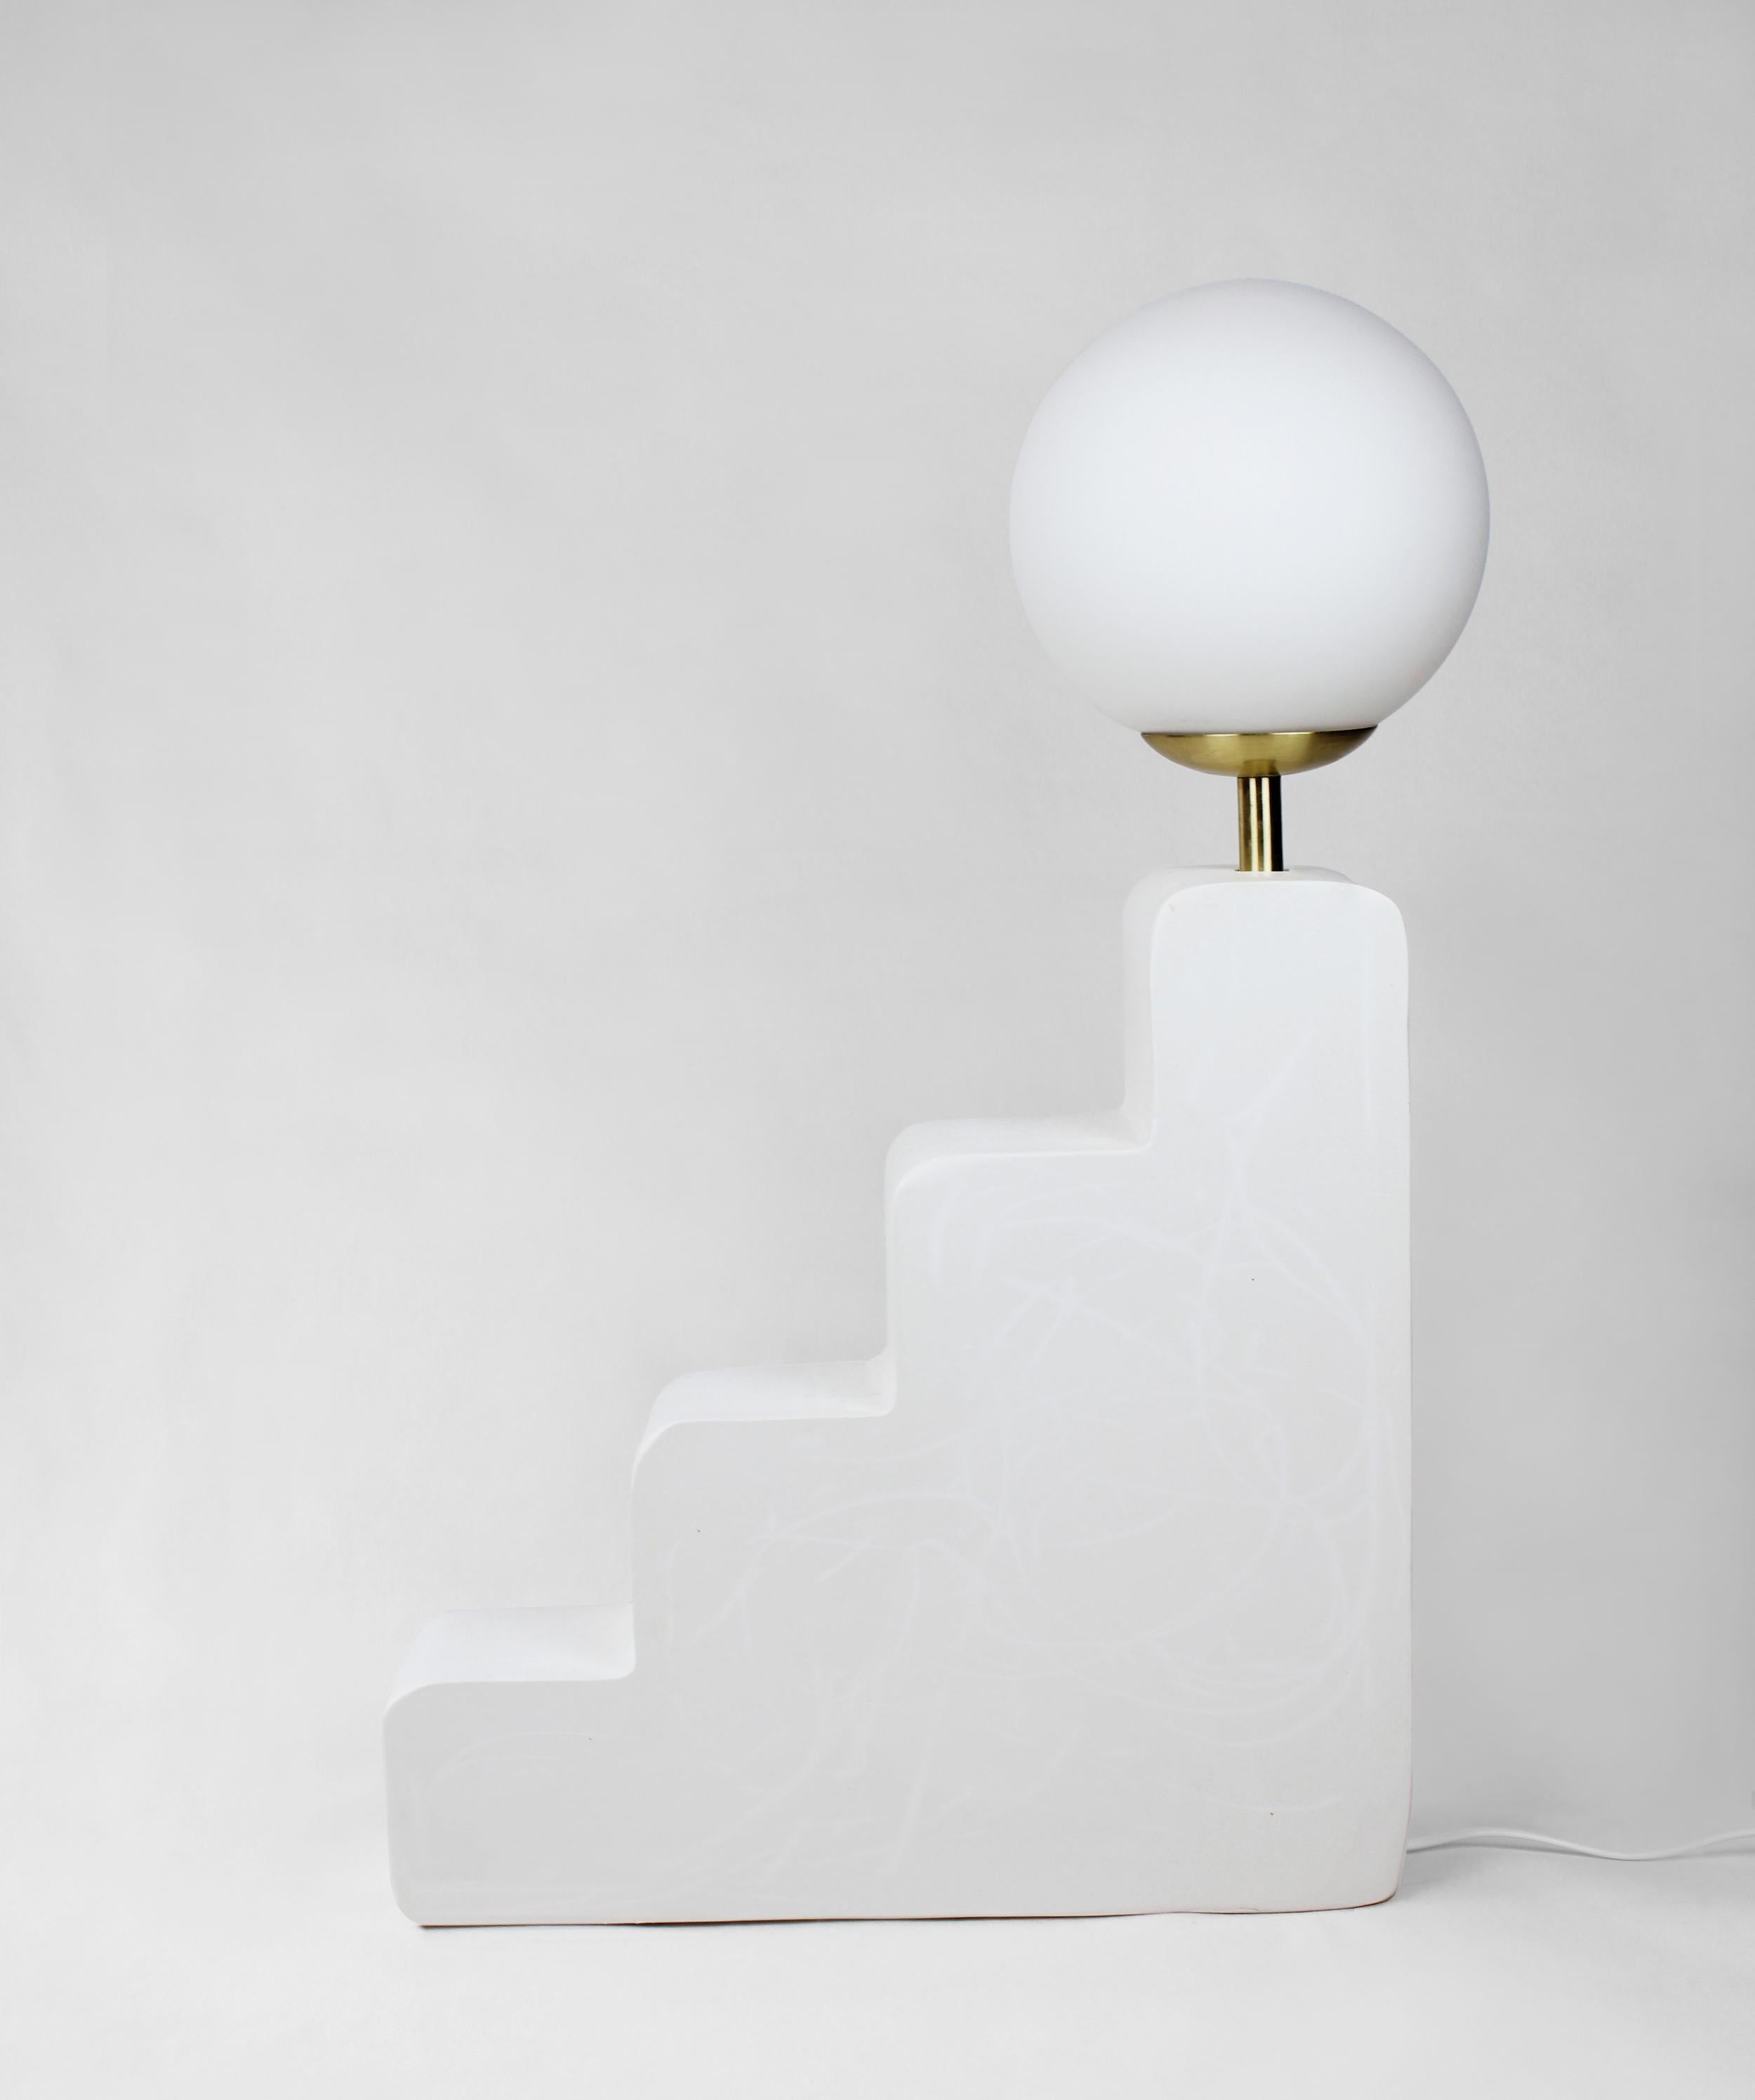 Small step lamp by AOAO
Dimensions: W 44 x D 11 x H 68 cm
Materials: White Plaster
Color options available upon request.

The idea was born after deciding to reconnect with my family and my grandfather – a sculptor artist. Learning to sculpt